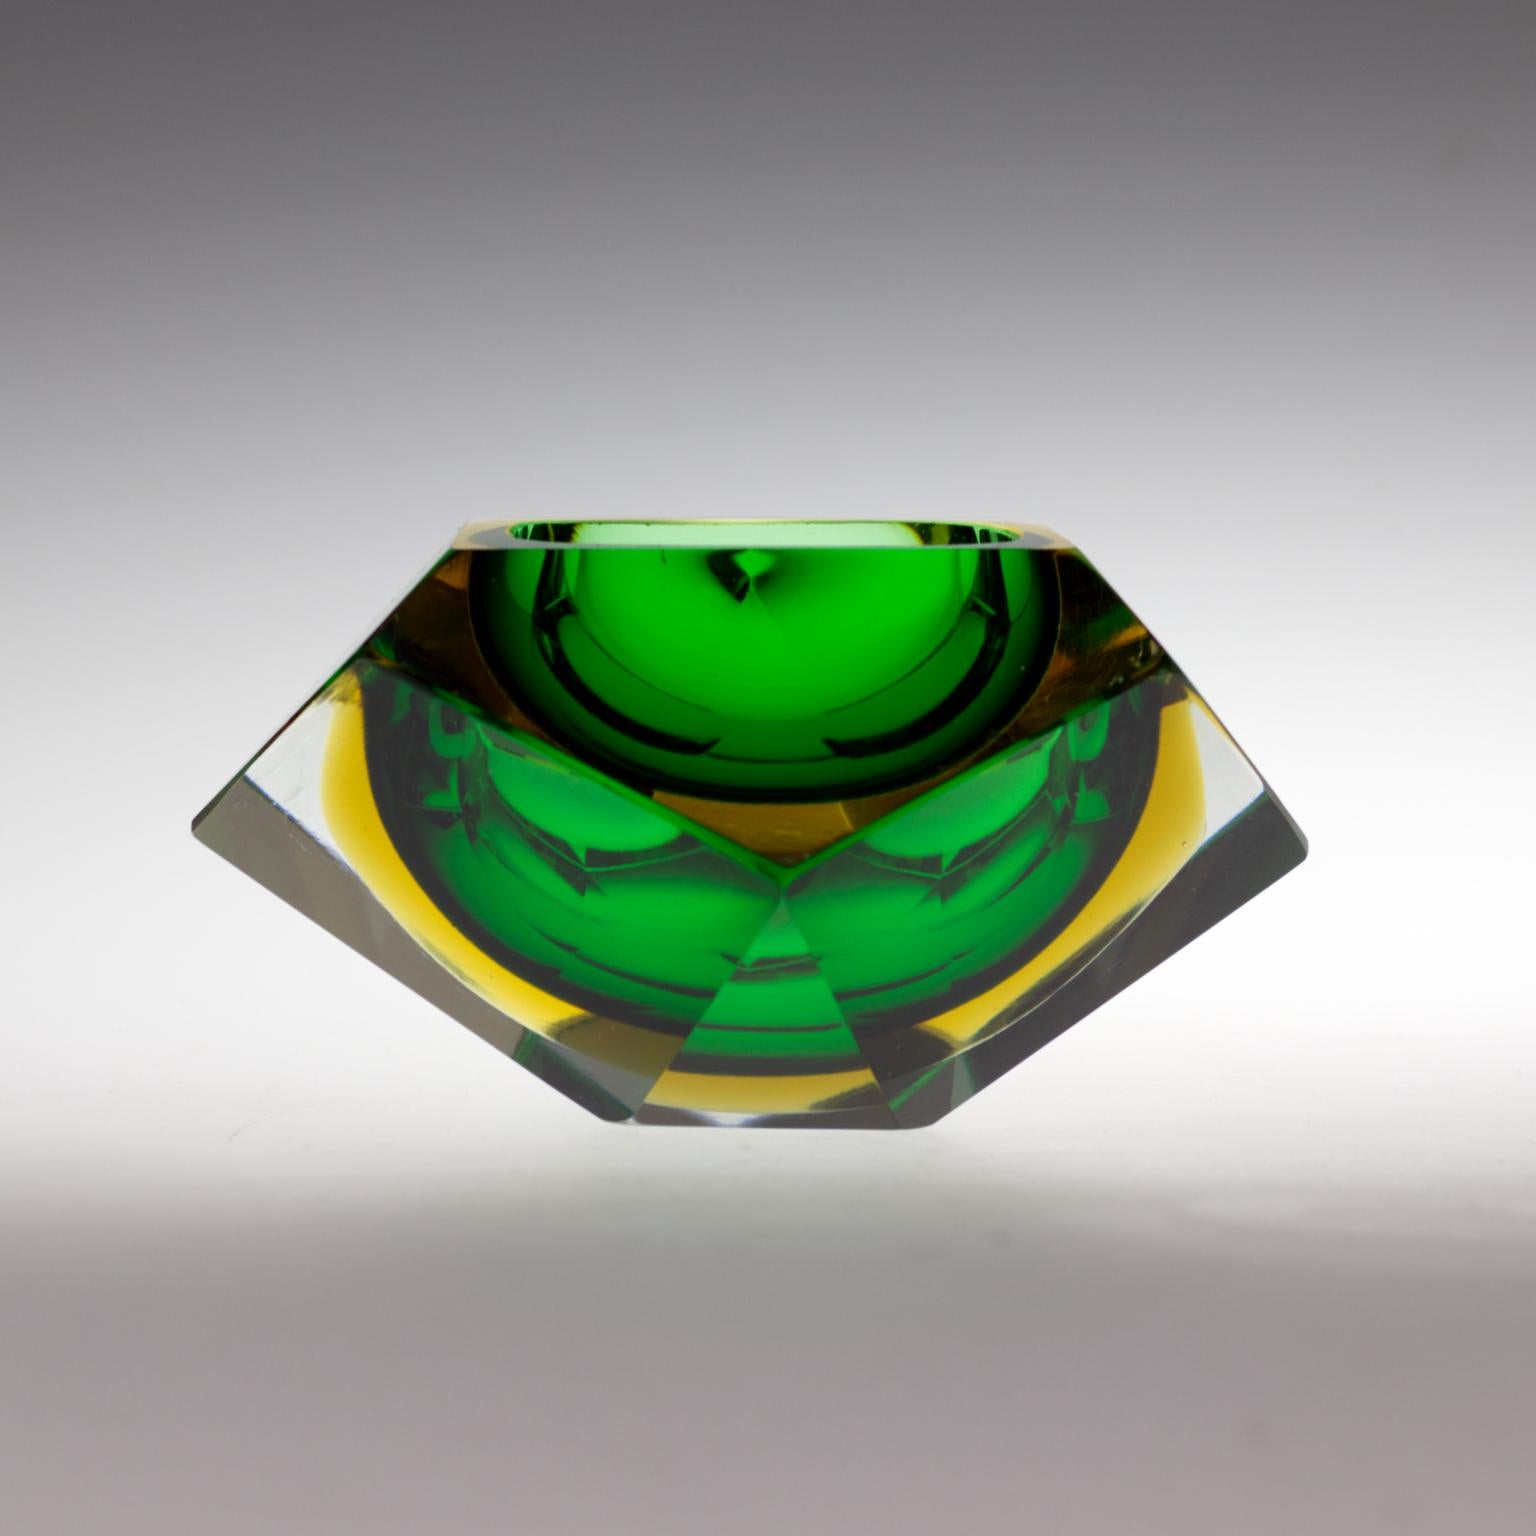 1960s gorgeous green ashtray or catch-all By Flavio Poli for Seguso in Murano Sommerso Glass. Made in Italy It seems a diamond The item is in very good condition, no chips. Dimensions: diameter 5,11